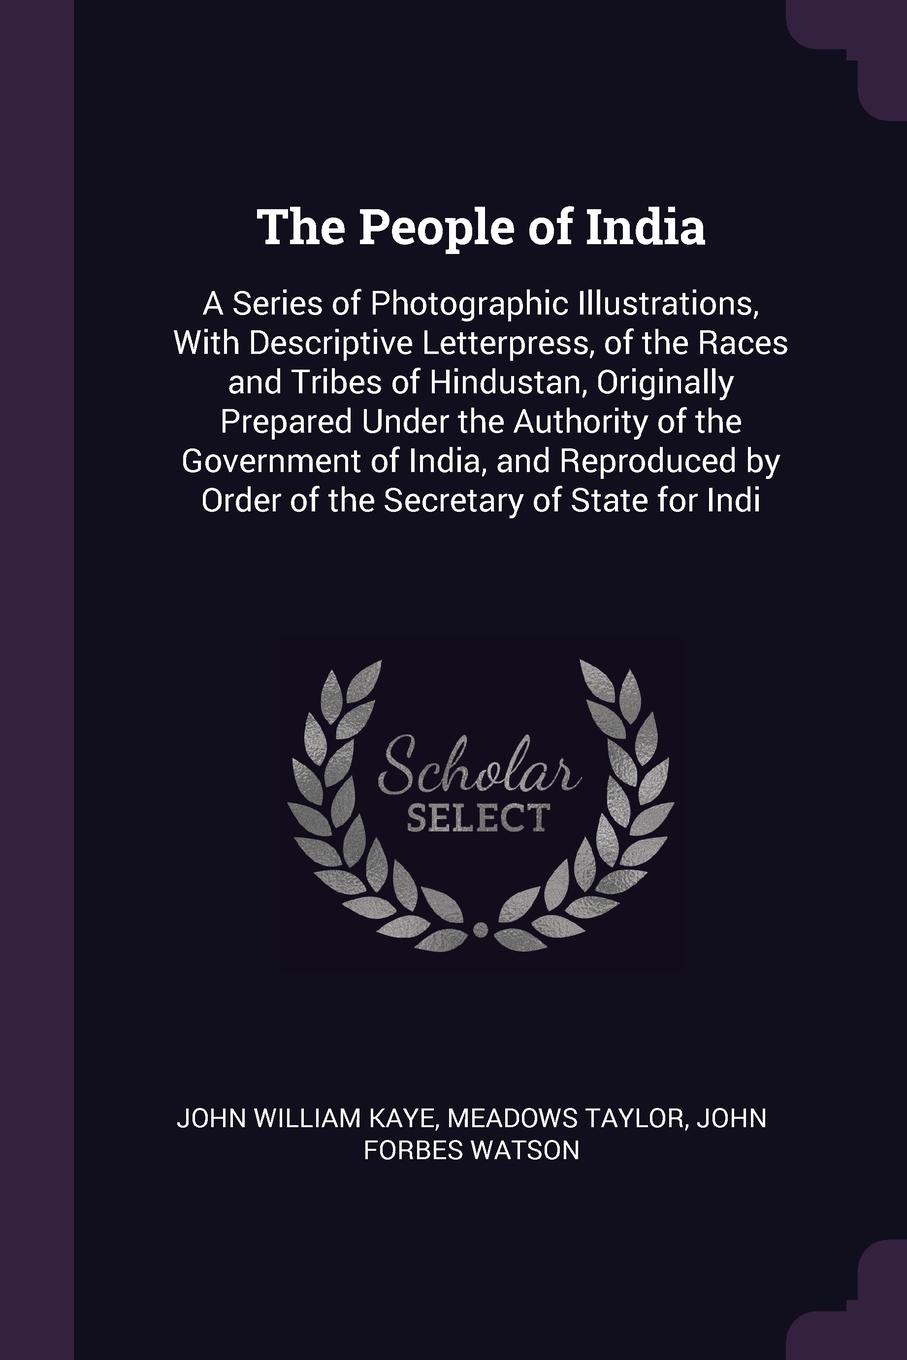 The People of India. A Series of Photographic Illustrations, With Descriptive Letterpress, of the Races and Tribes of Hindustan, Originally Prepared Under the Authority of the Government of India, and Reproduced by Order of the Secretary of State ...